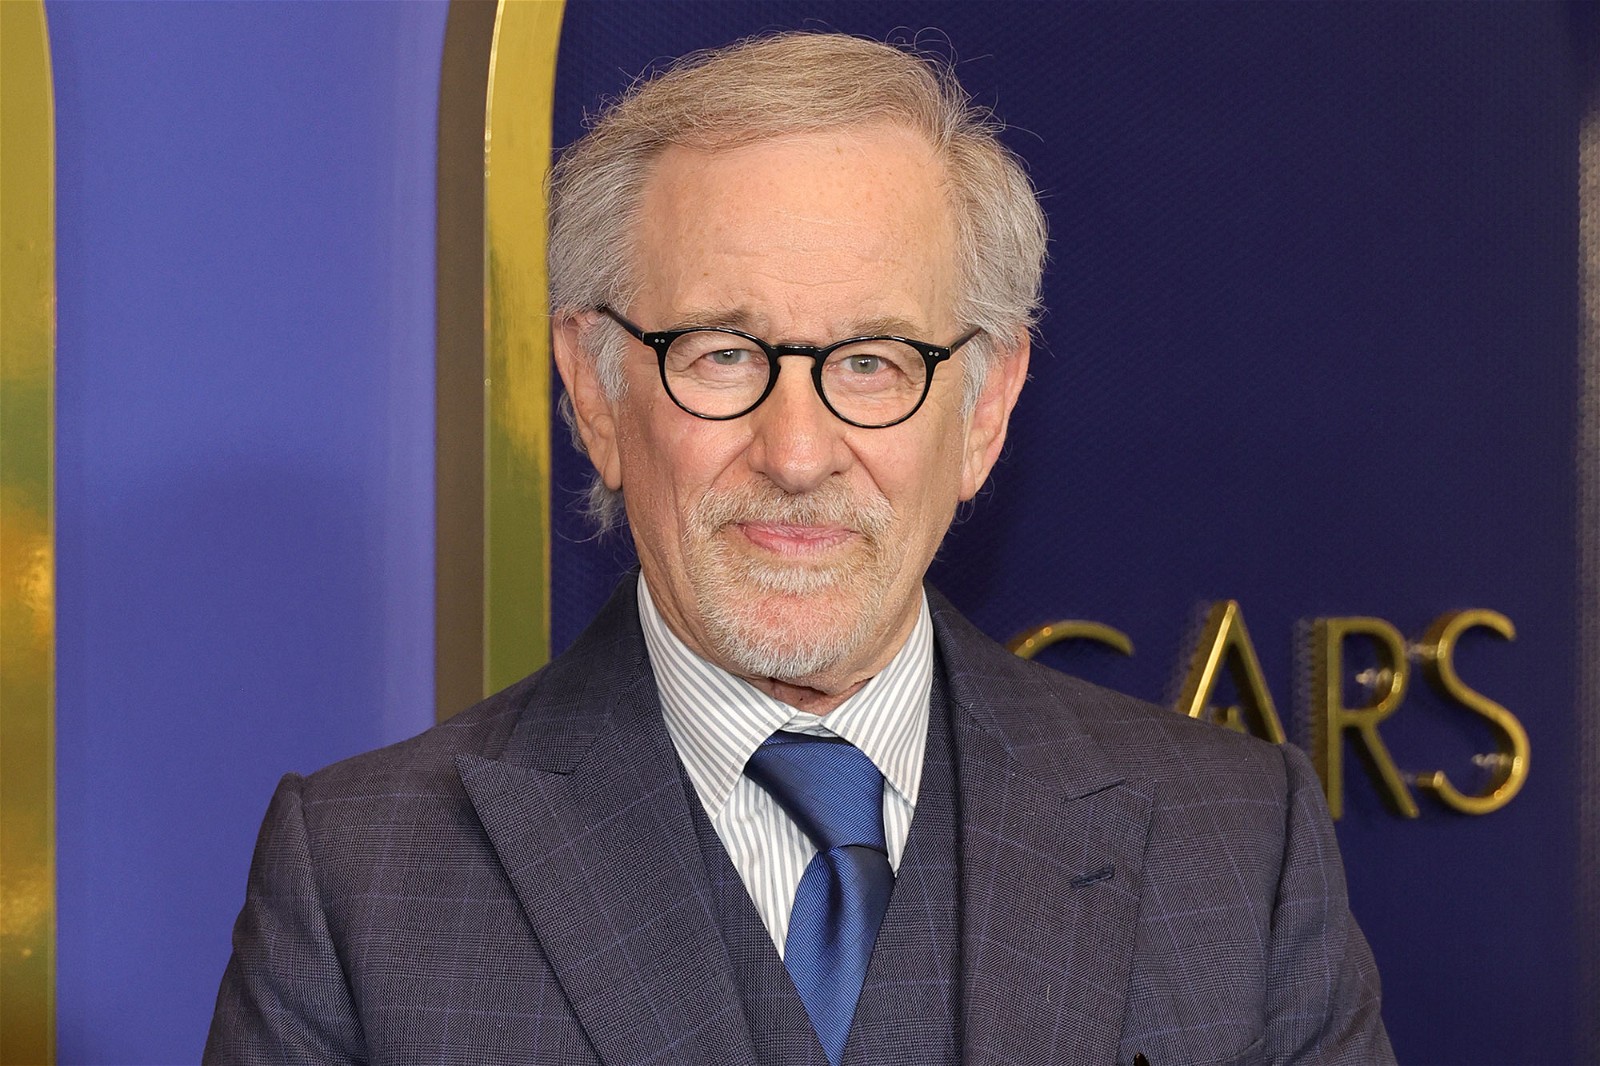 Steven Spielberg is considered one of the greats!